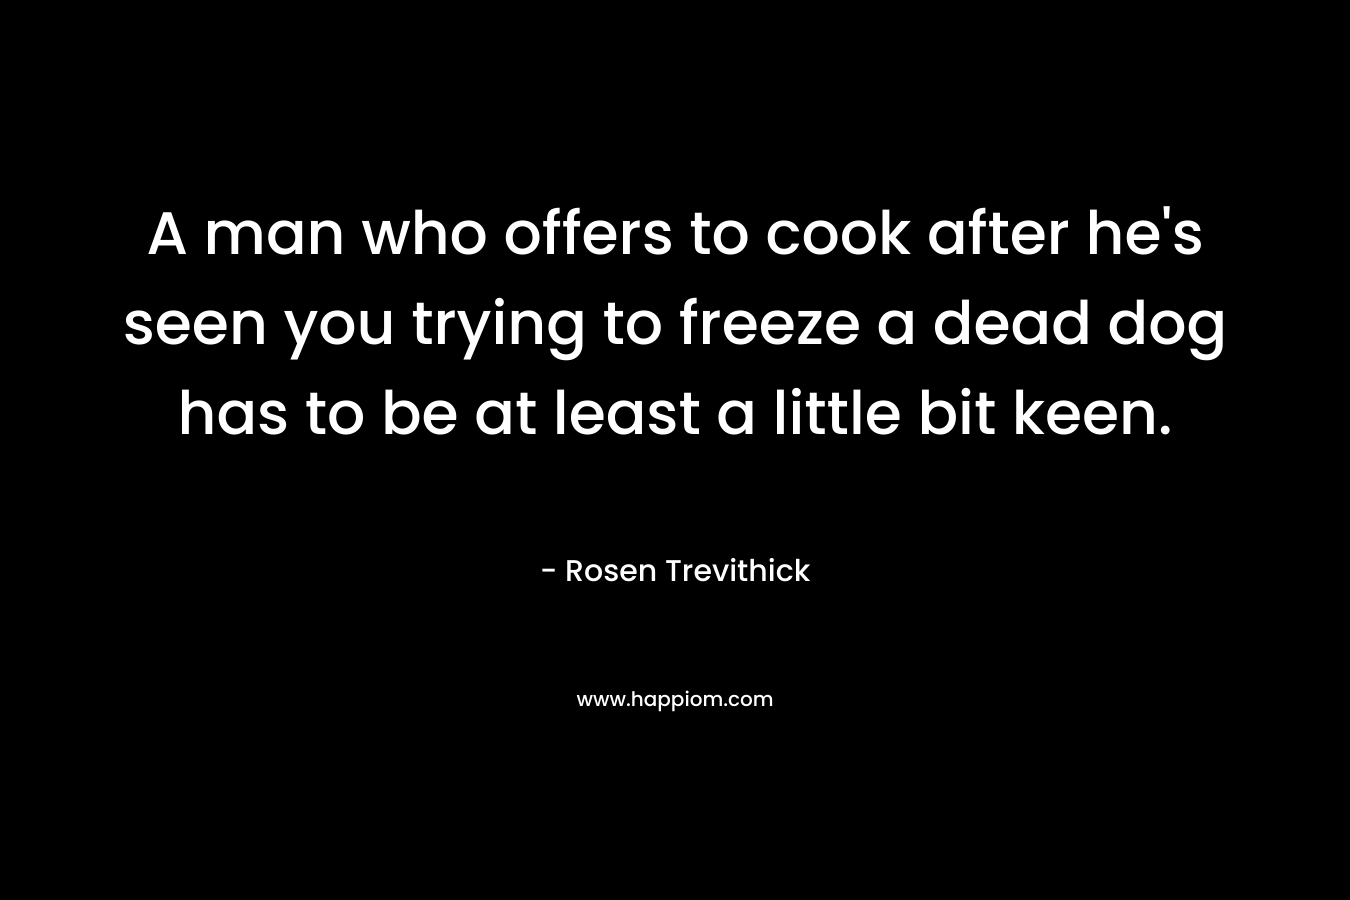 A man who offers to cook after he’s seen you trying to freeze a dead dog has to be at least a little bit keen. – Rosen Trevithick